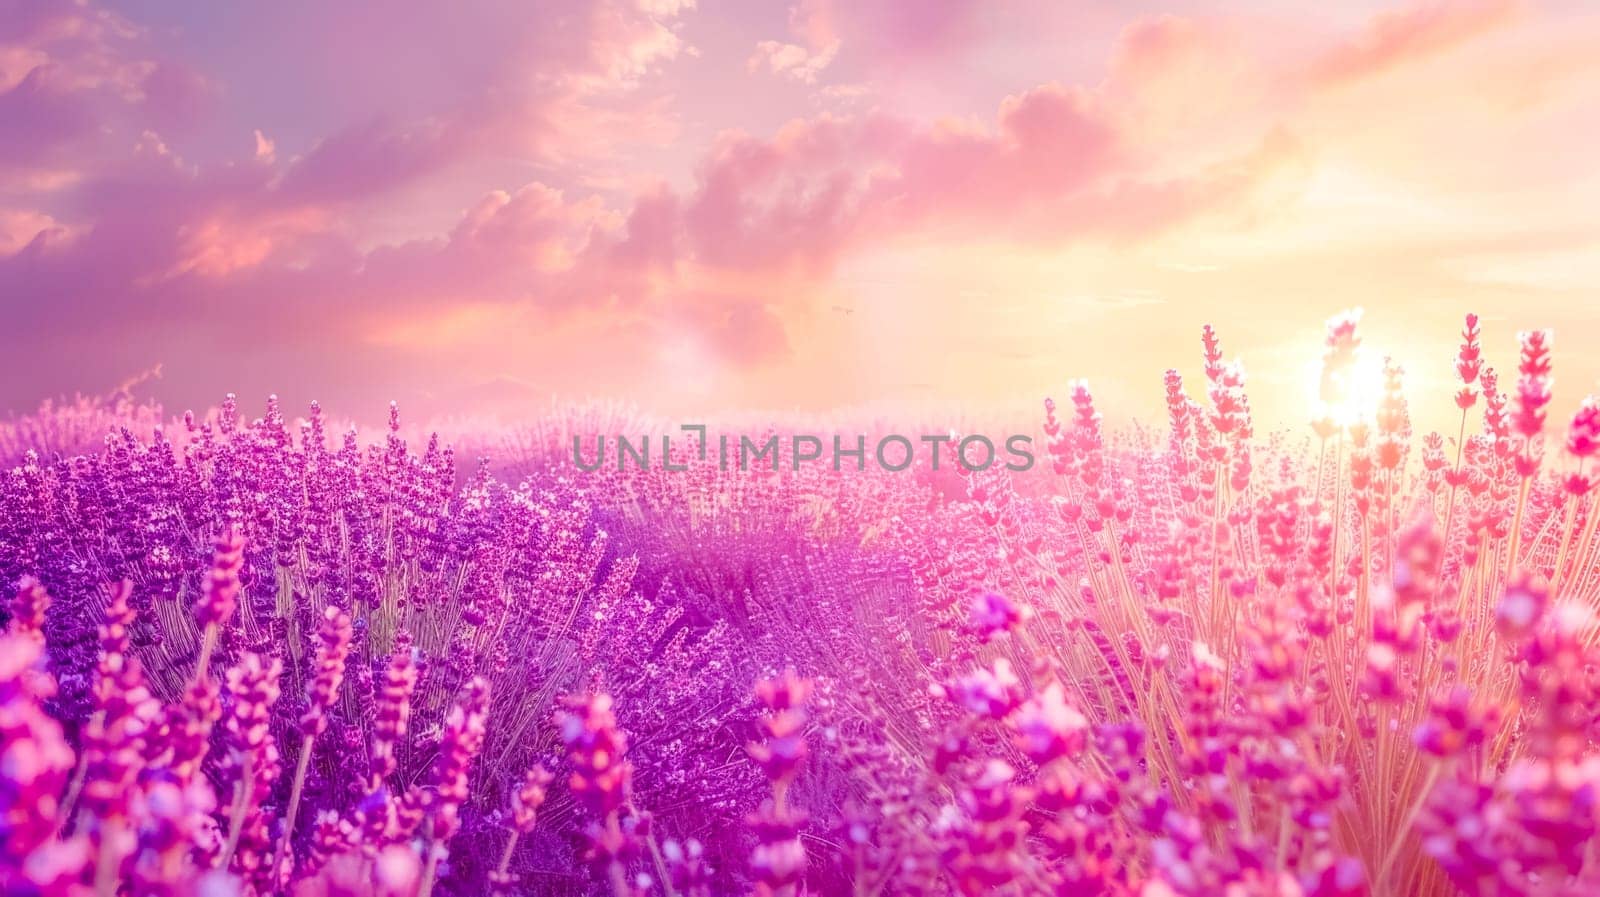 Scenic view of a vibrant lavender field bathed in the warm glow of a setting sun